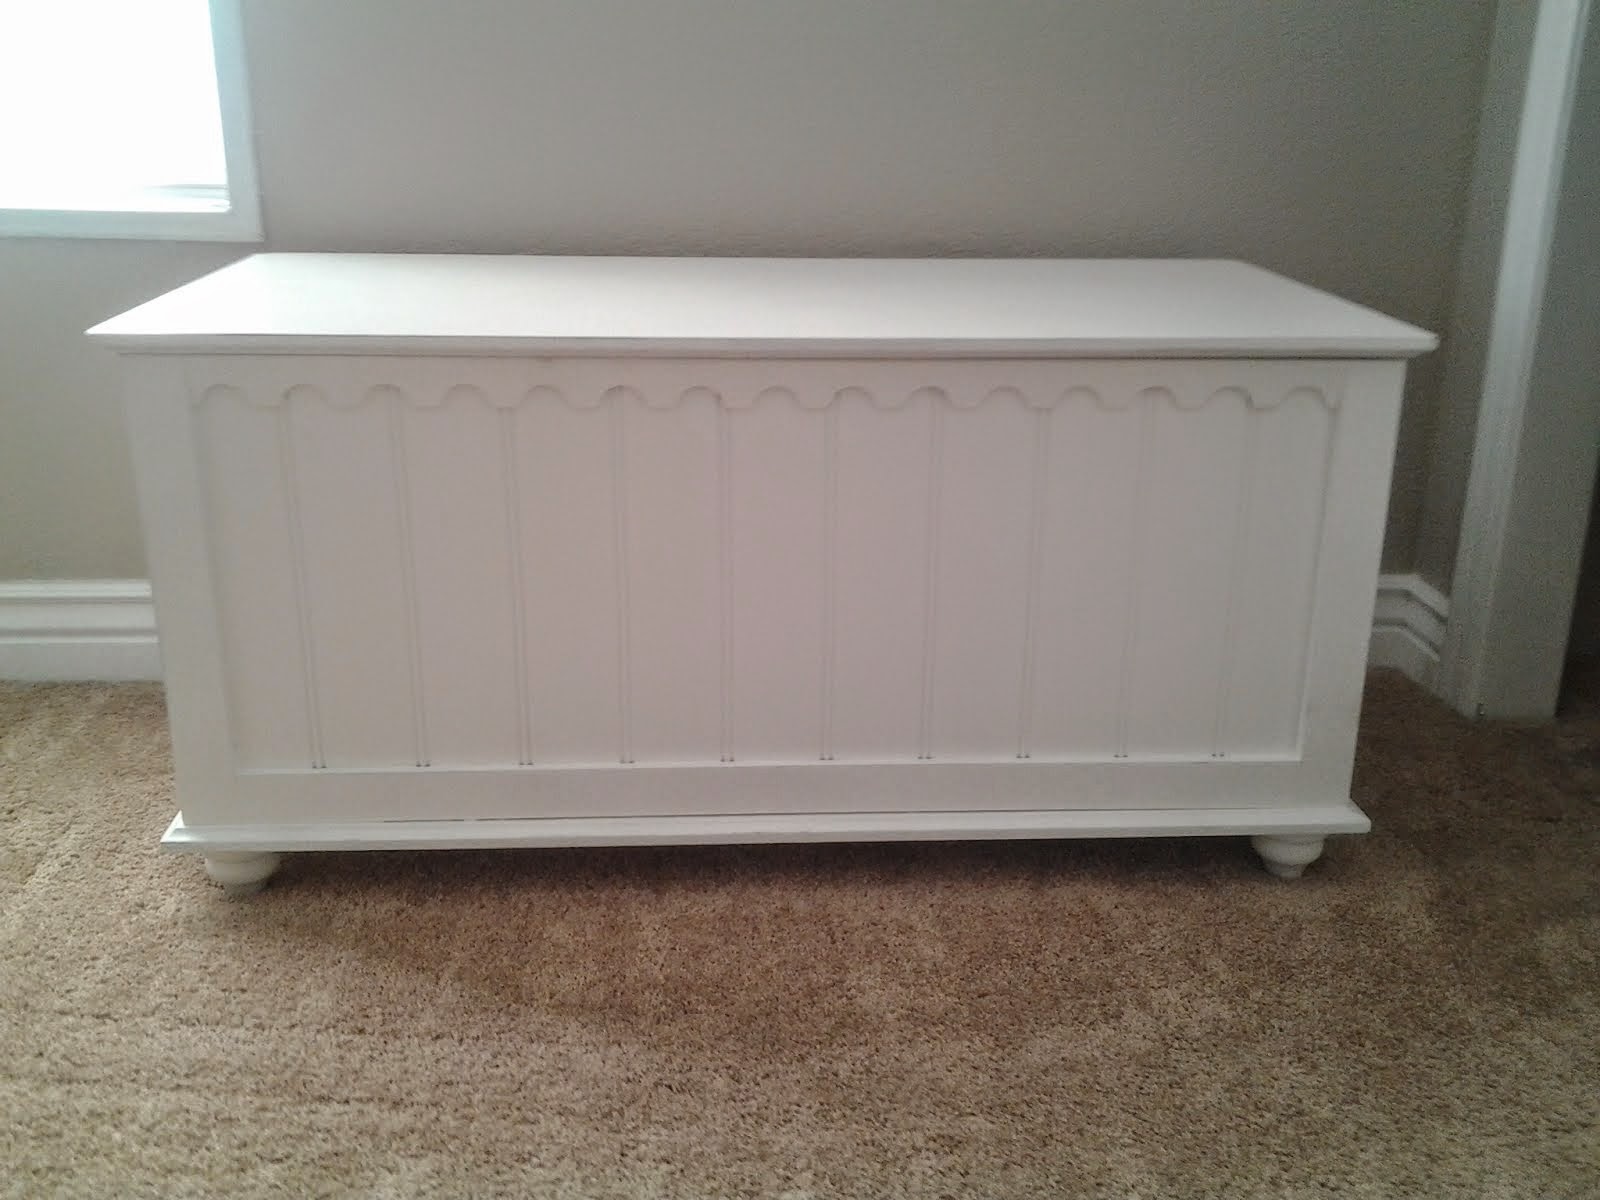 Toy box chest $sold